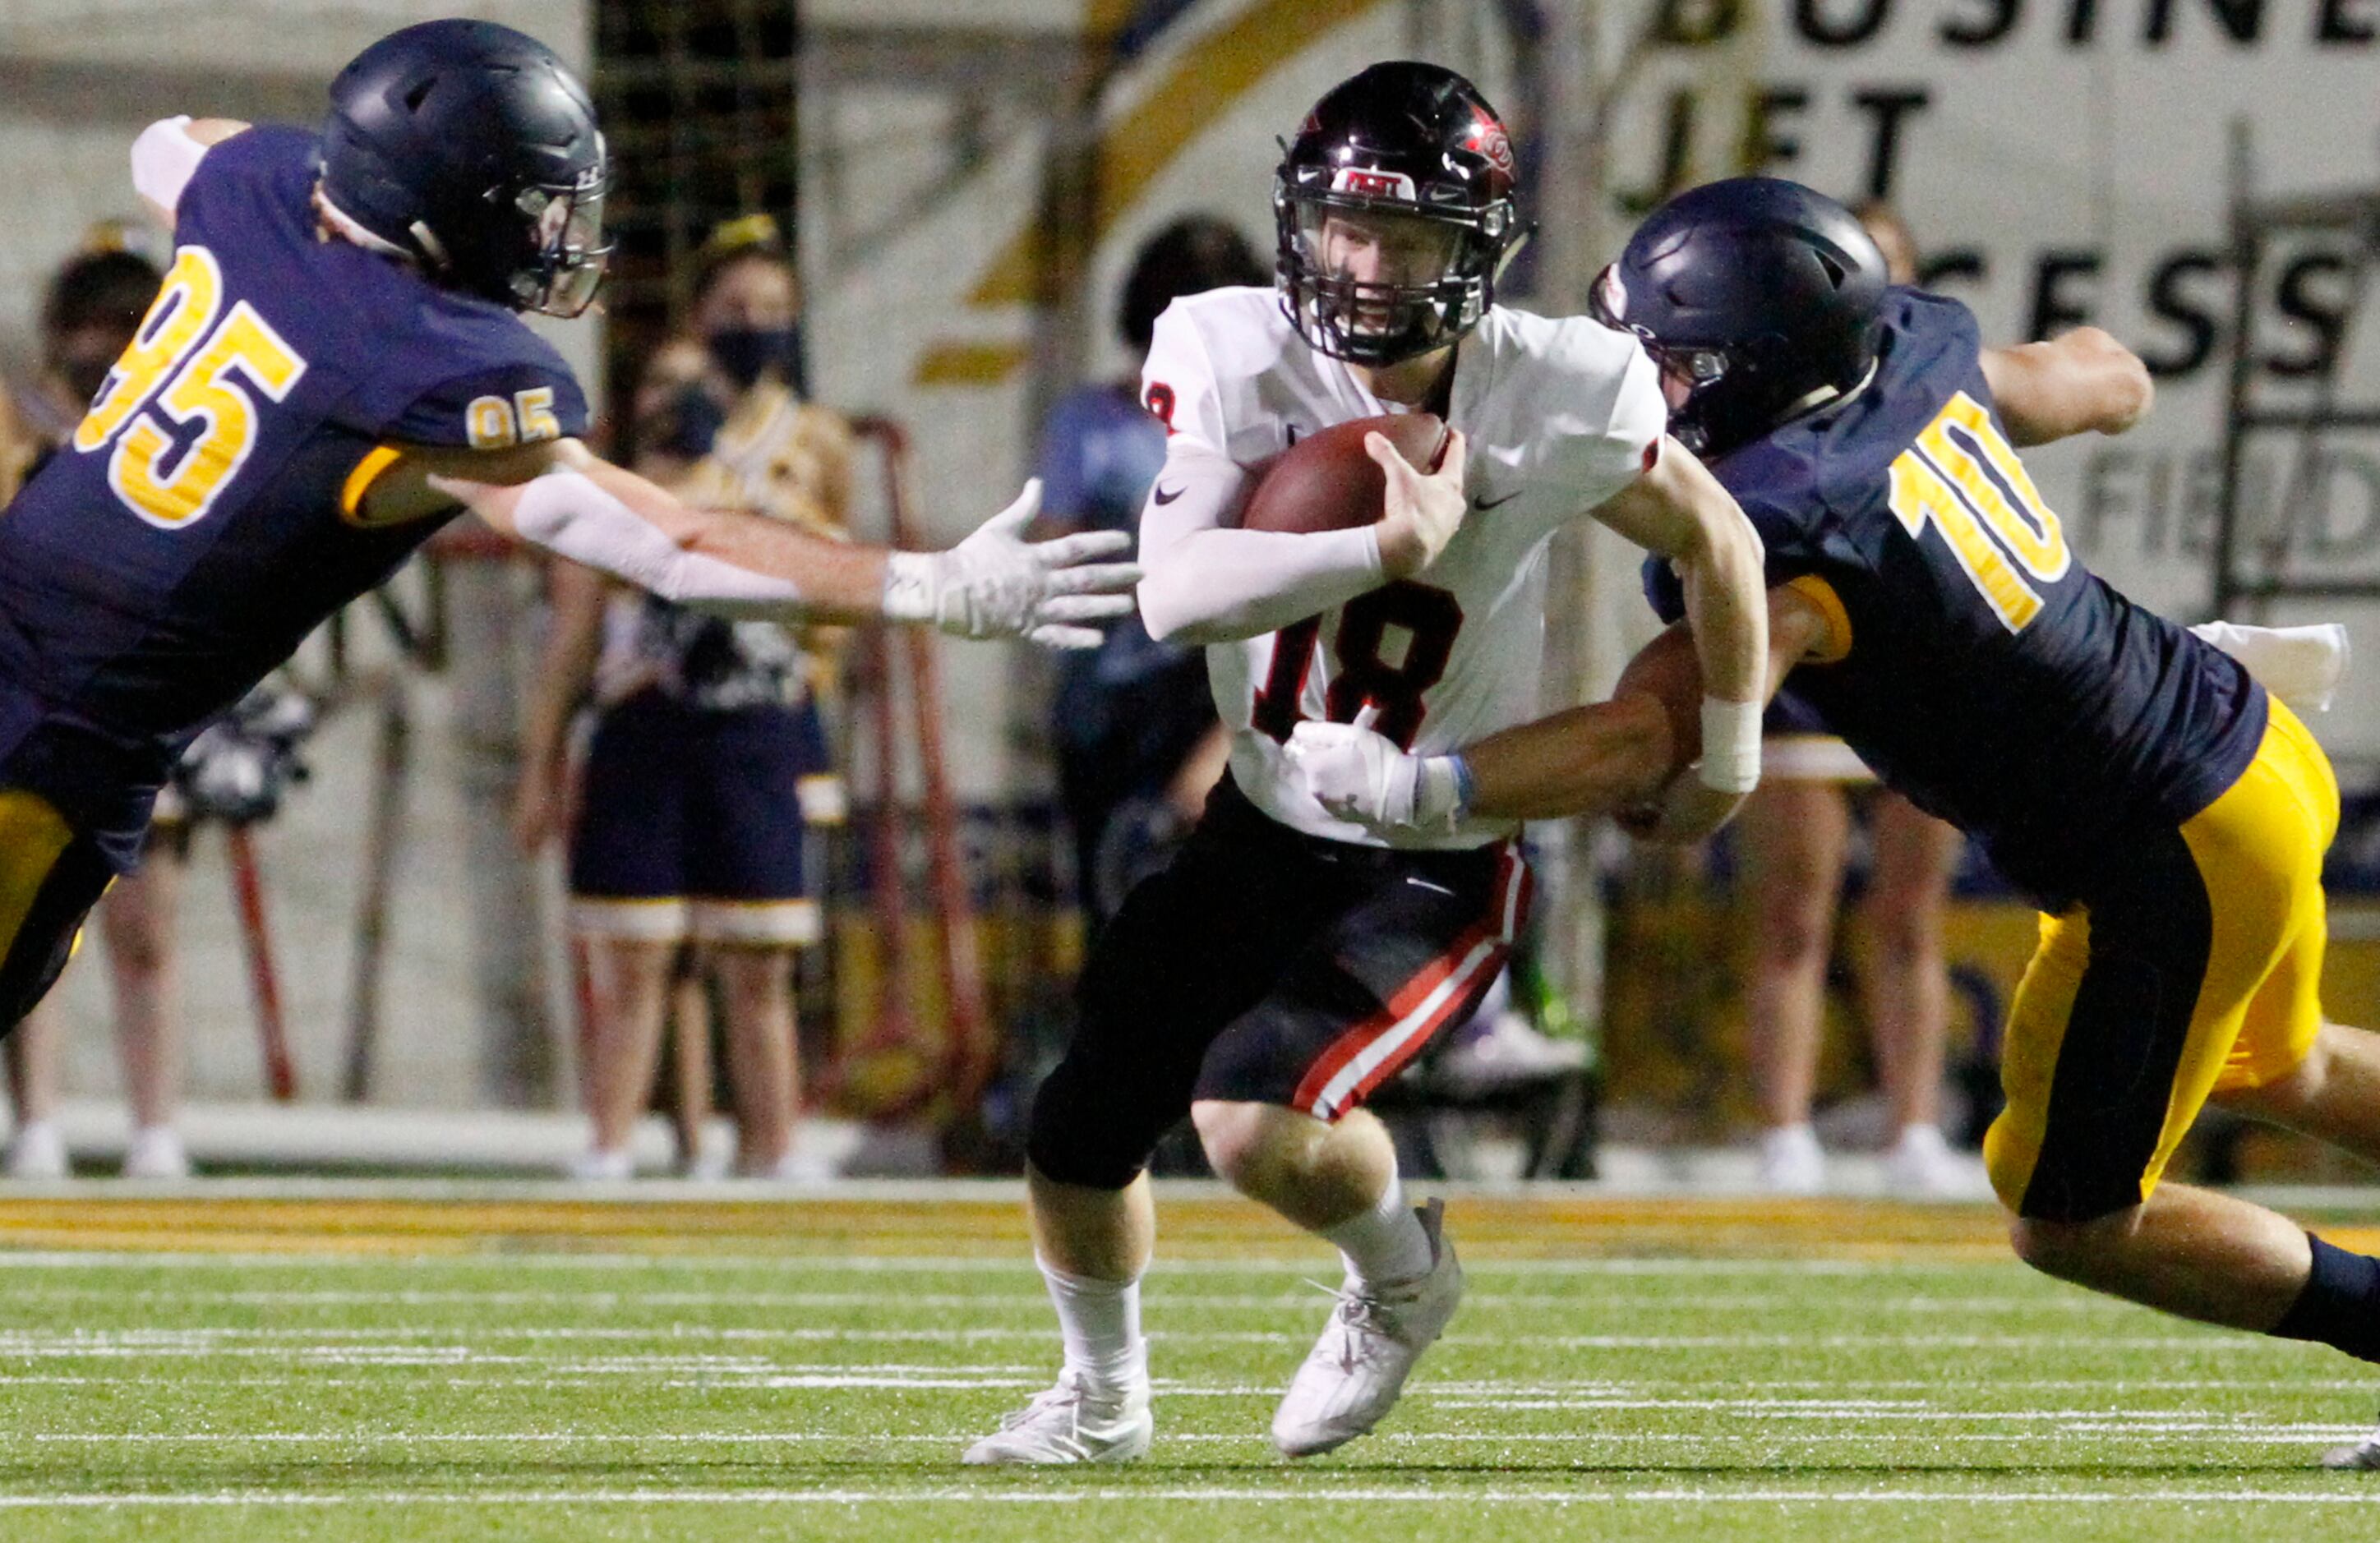 Coppell senior quarterback Ryan Walker (18) is nearly sacked on a play by Highland Park...